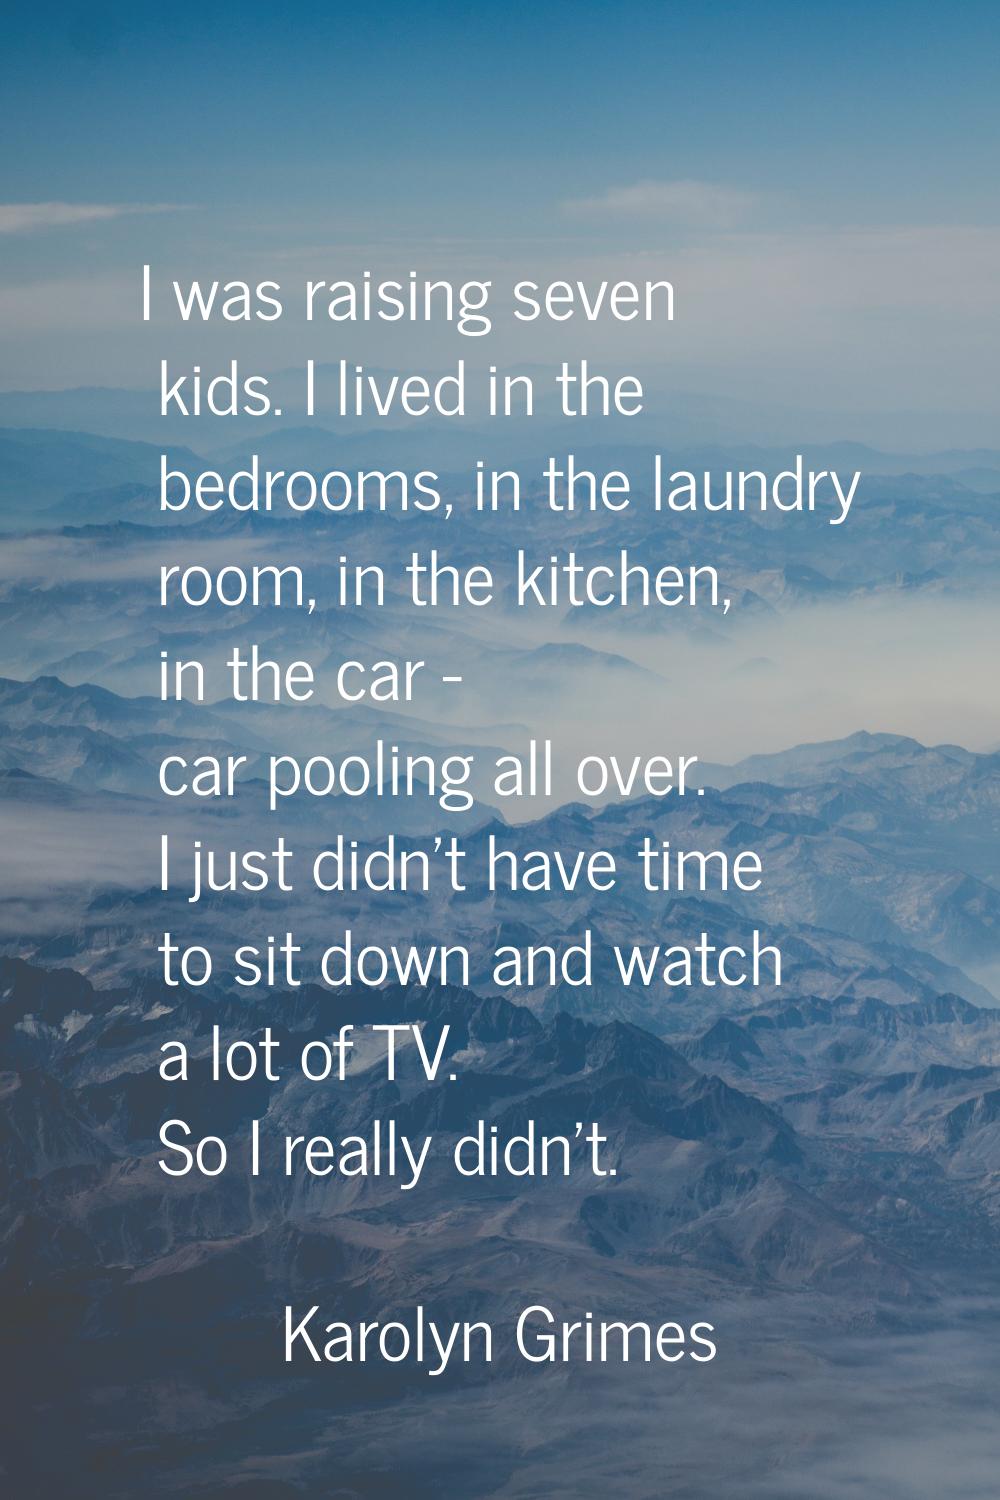 I was raising seven kids. I lived in the bedrooms, in the laundry room, in the kitchen, in the car 